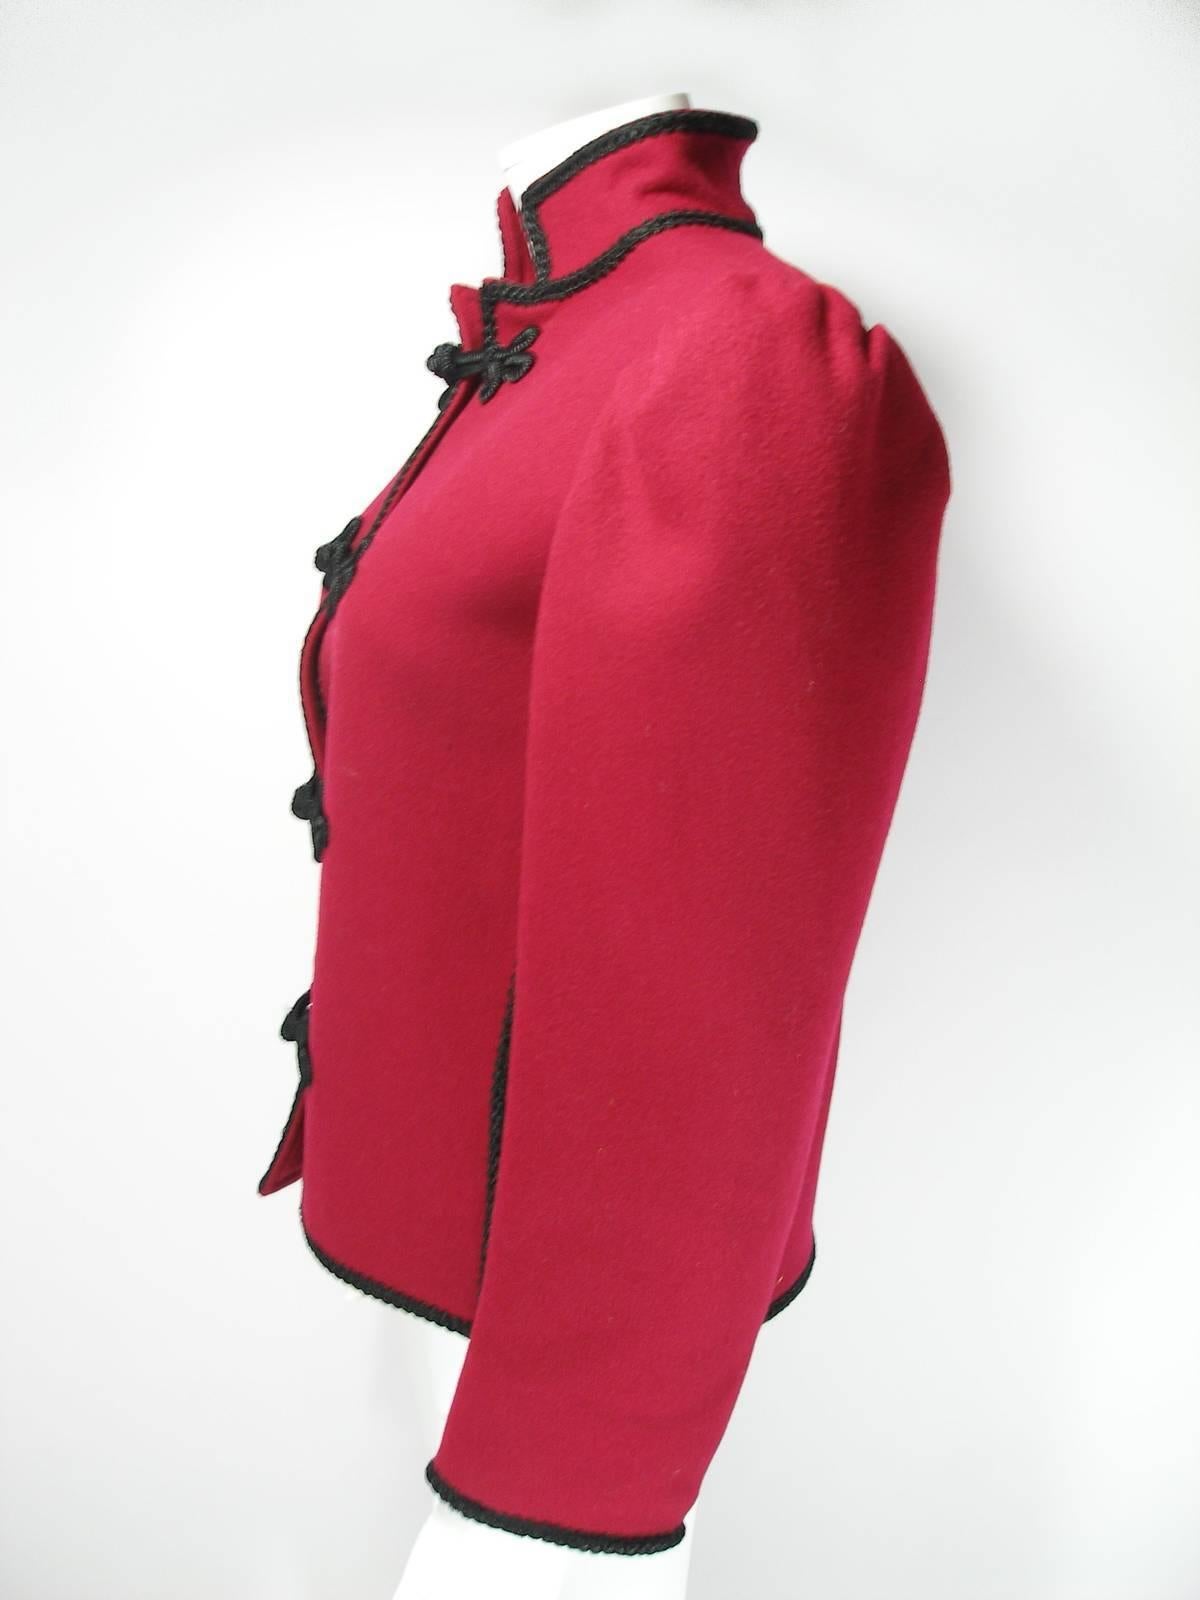 Impossible to find 
Aboluty Collectible 
Yves Saint Laurent, Red / bordeaux color, wool, Russian collection jacket, with puff sleeve, detail, Mandarin collar and black Passementerie trim.
This color is Fantastic ! 
Designer: Yves Saint Laurent
Place